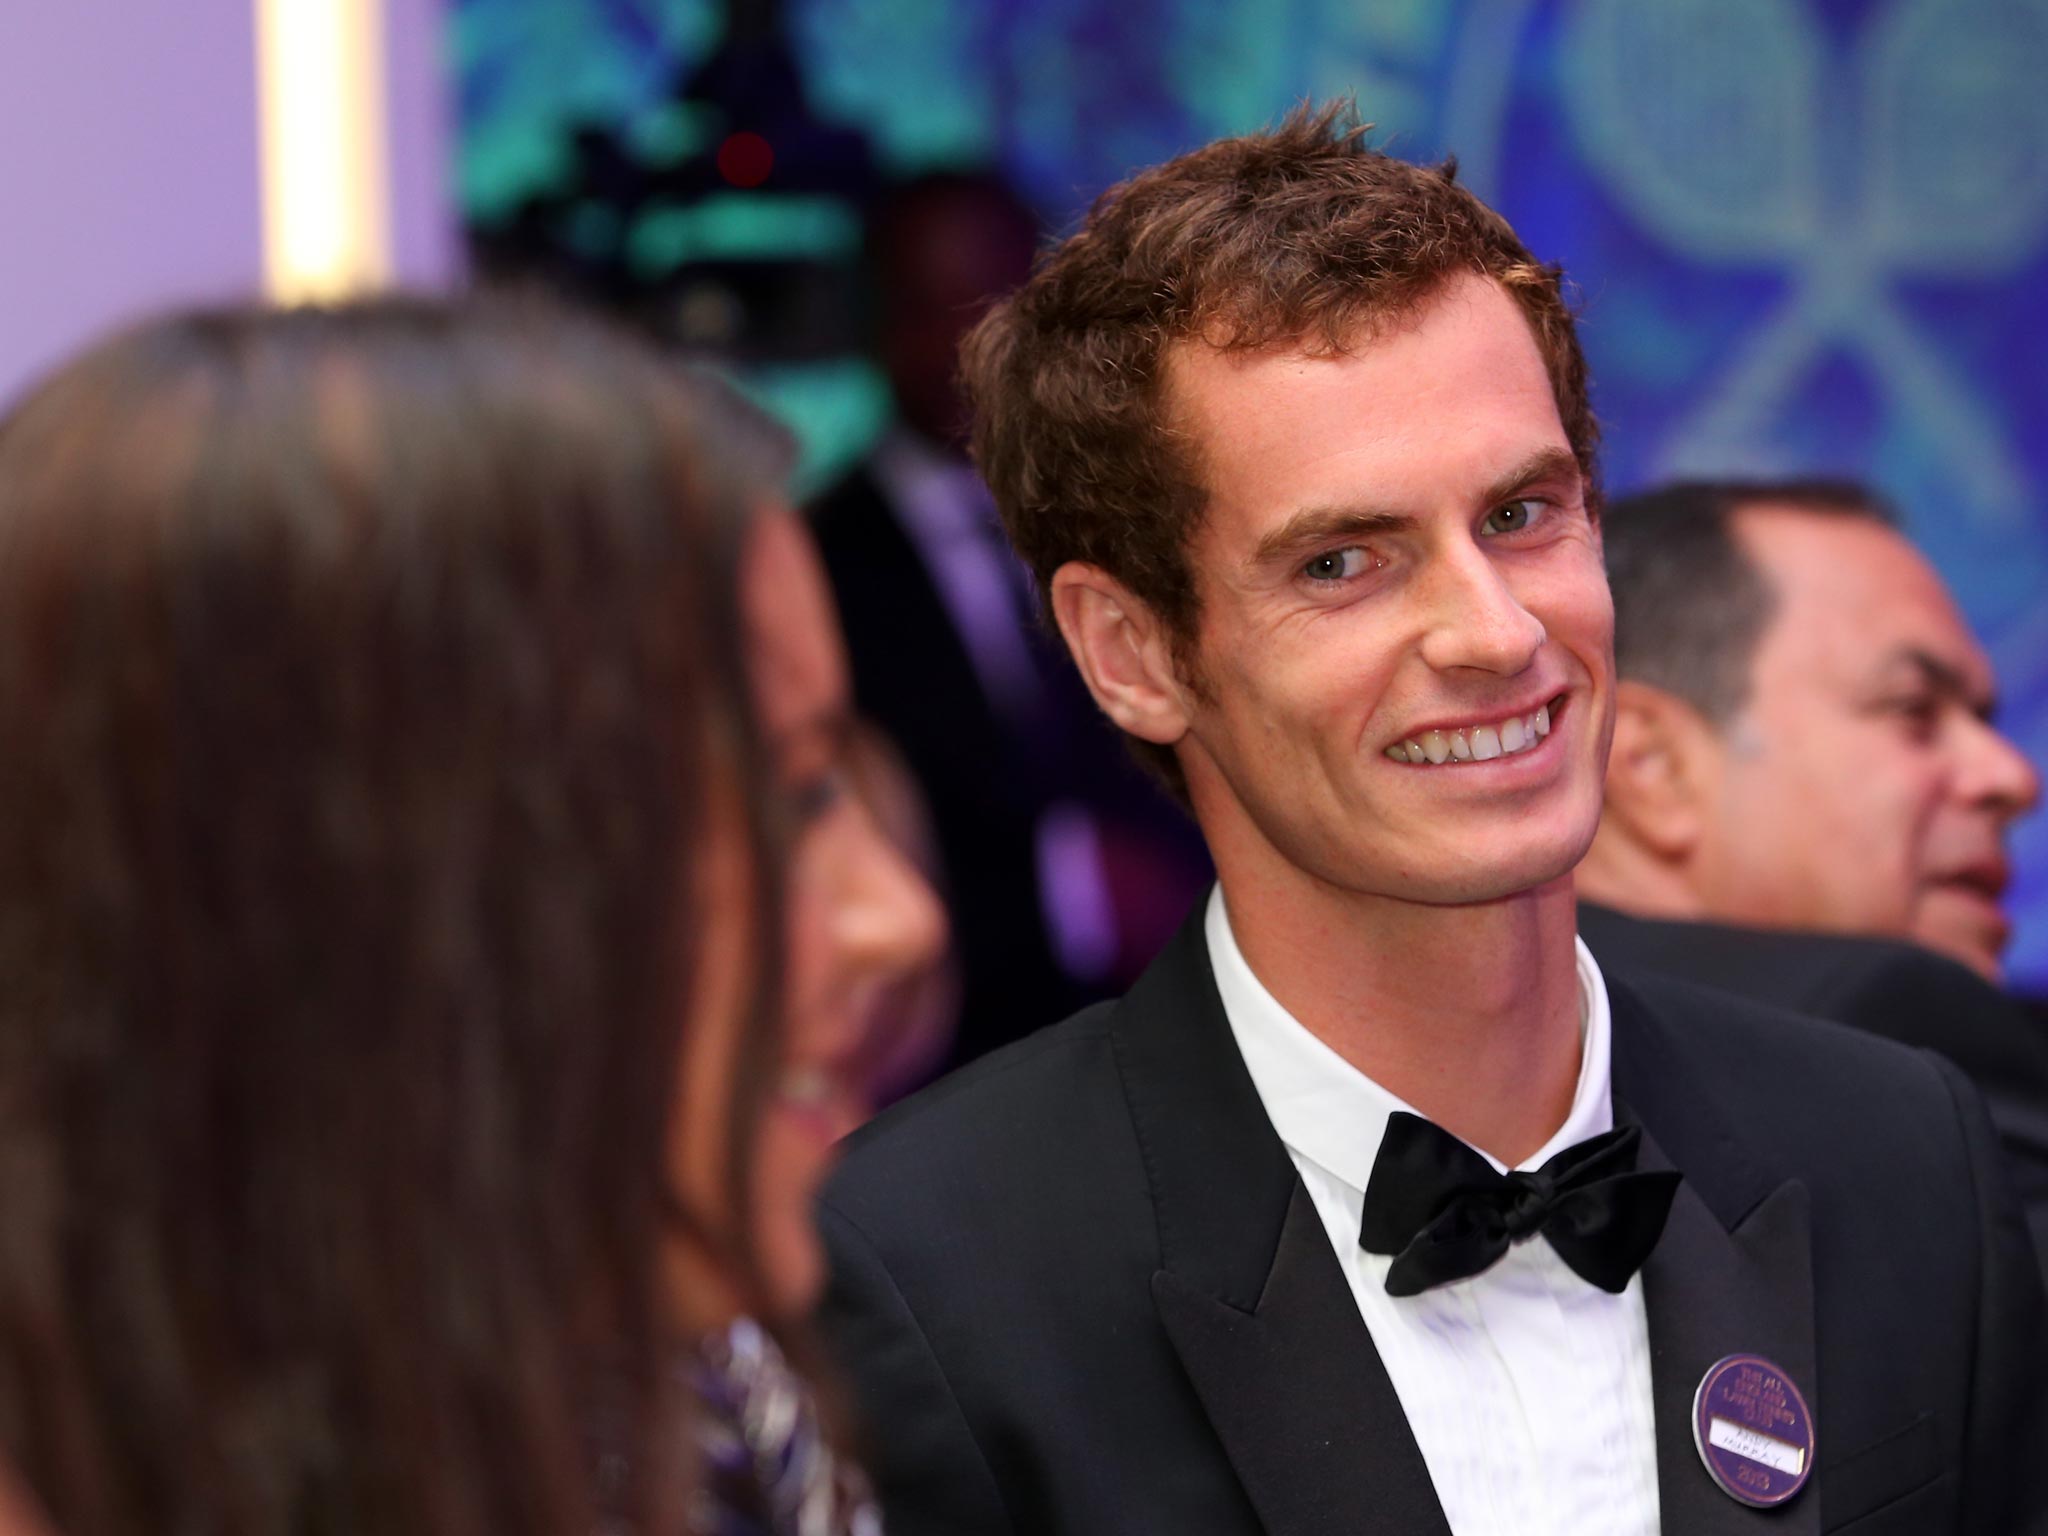 Andy Murray made good use of emojis on his wedding day - but would never mix them in his professional life